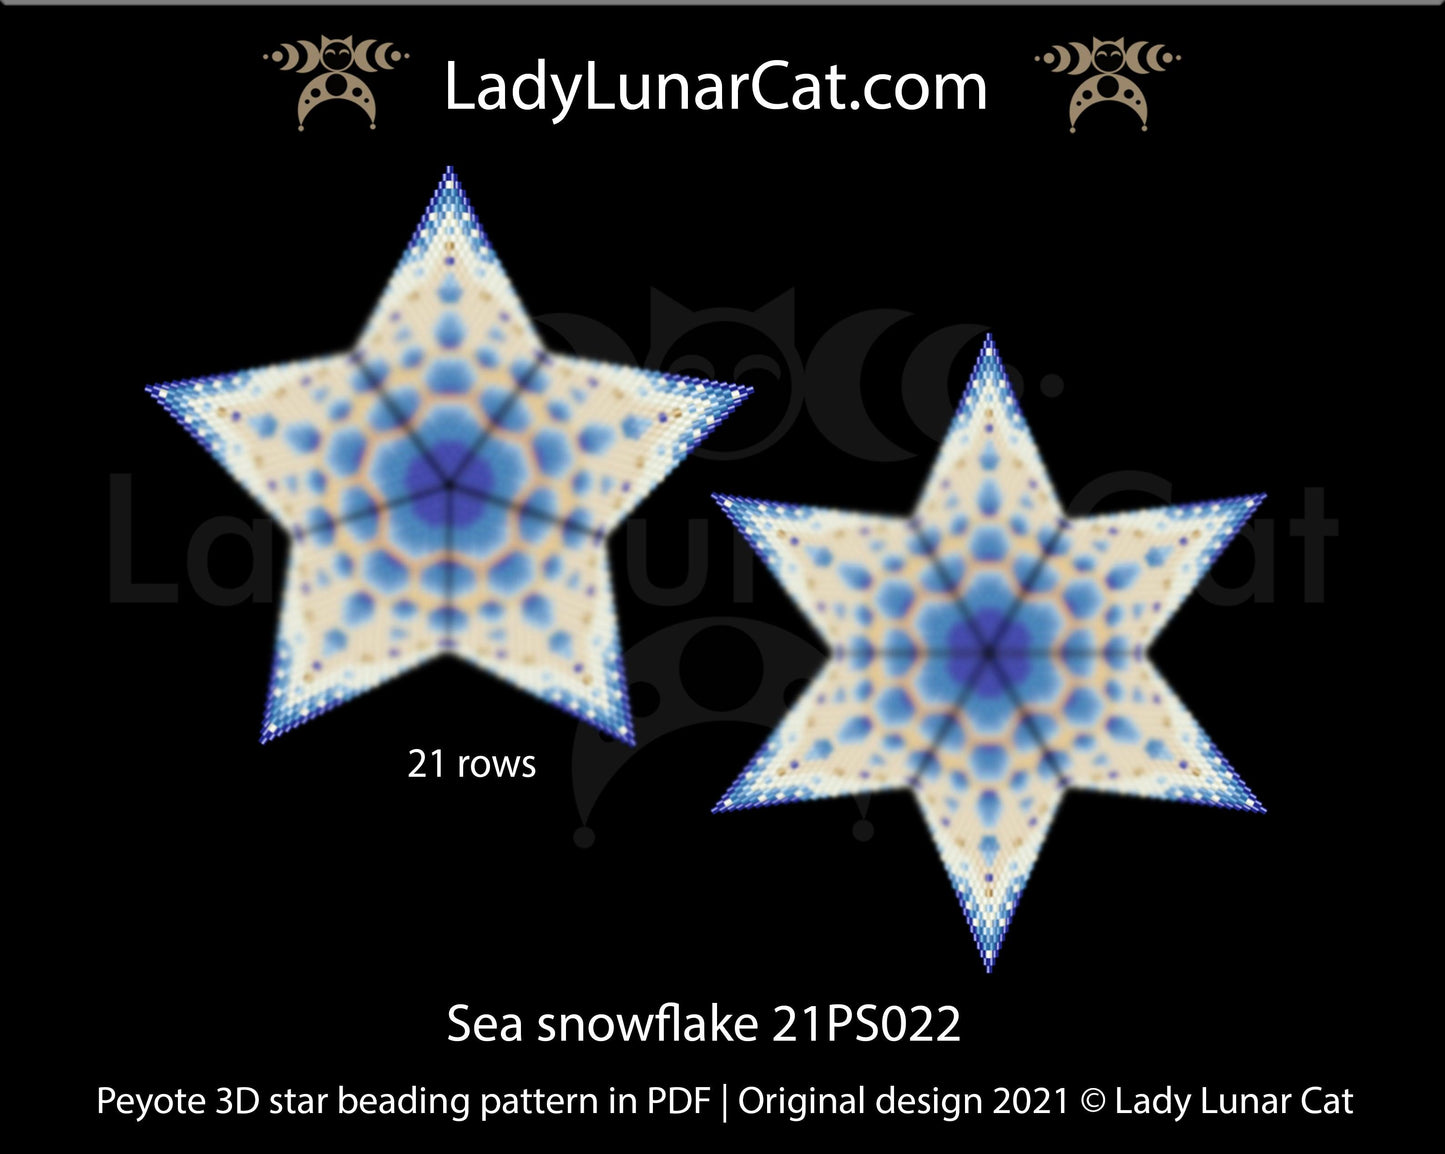 Beaded star pattern for beading- Sea snowflake 21PS022 21 rows LadyLunarCat